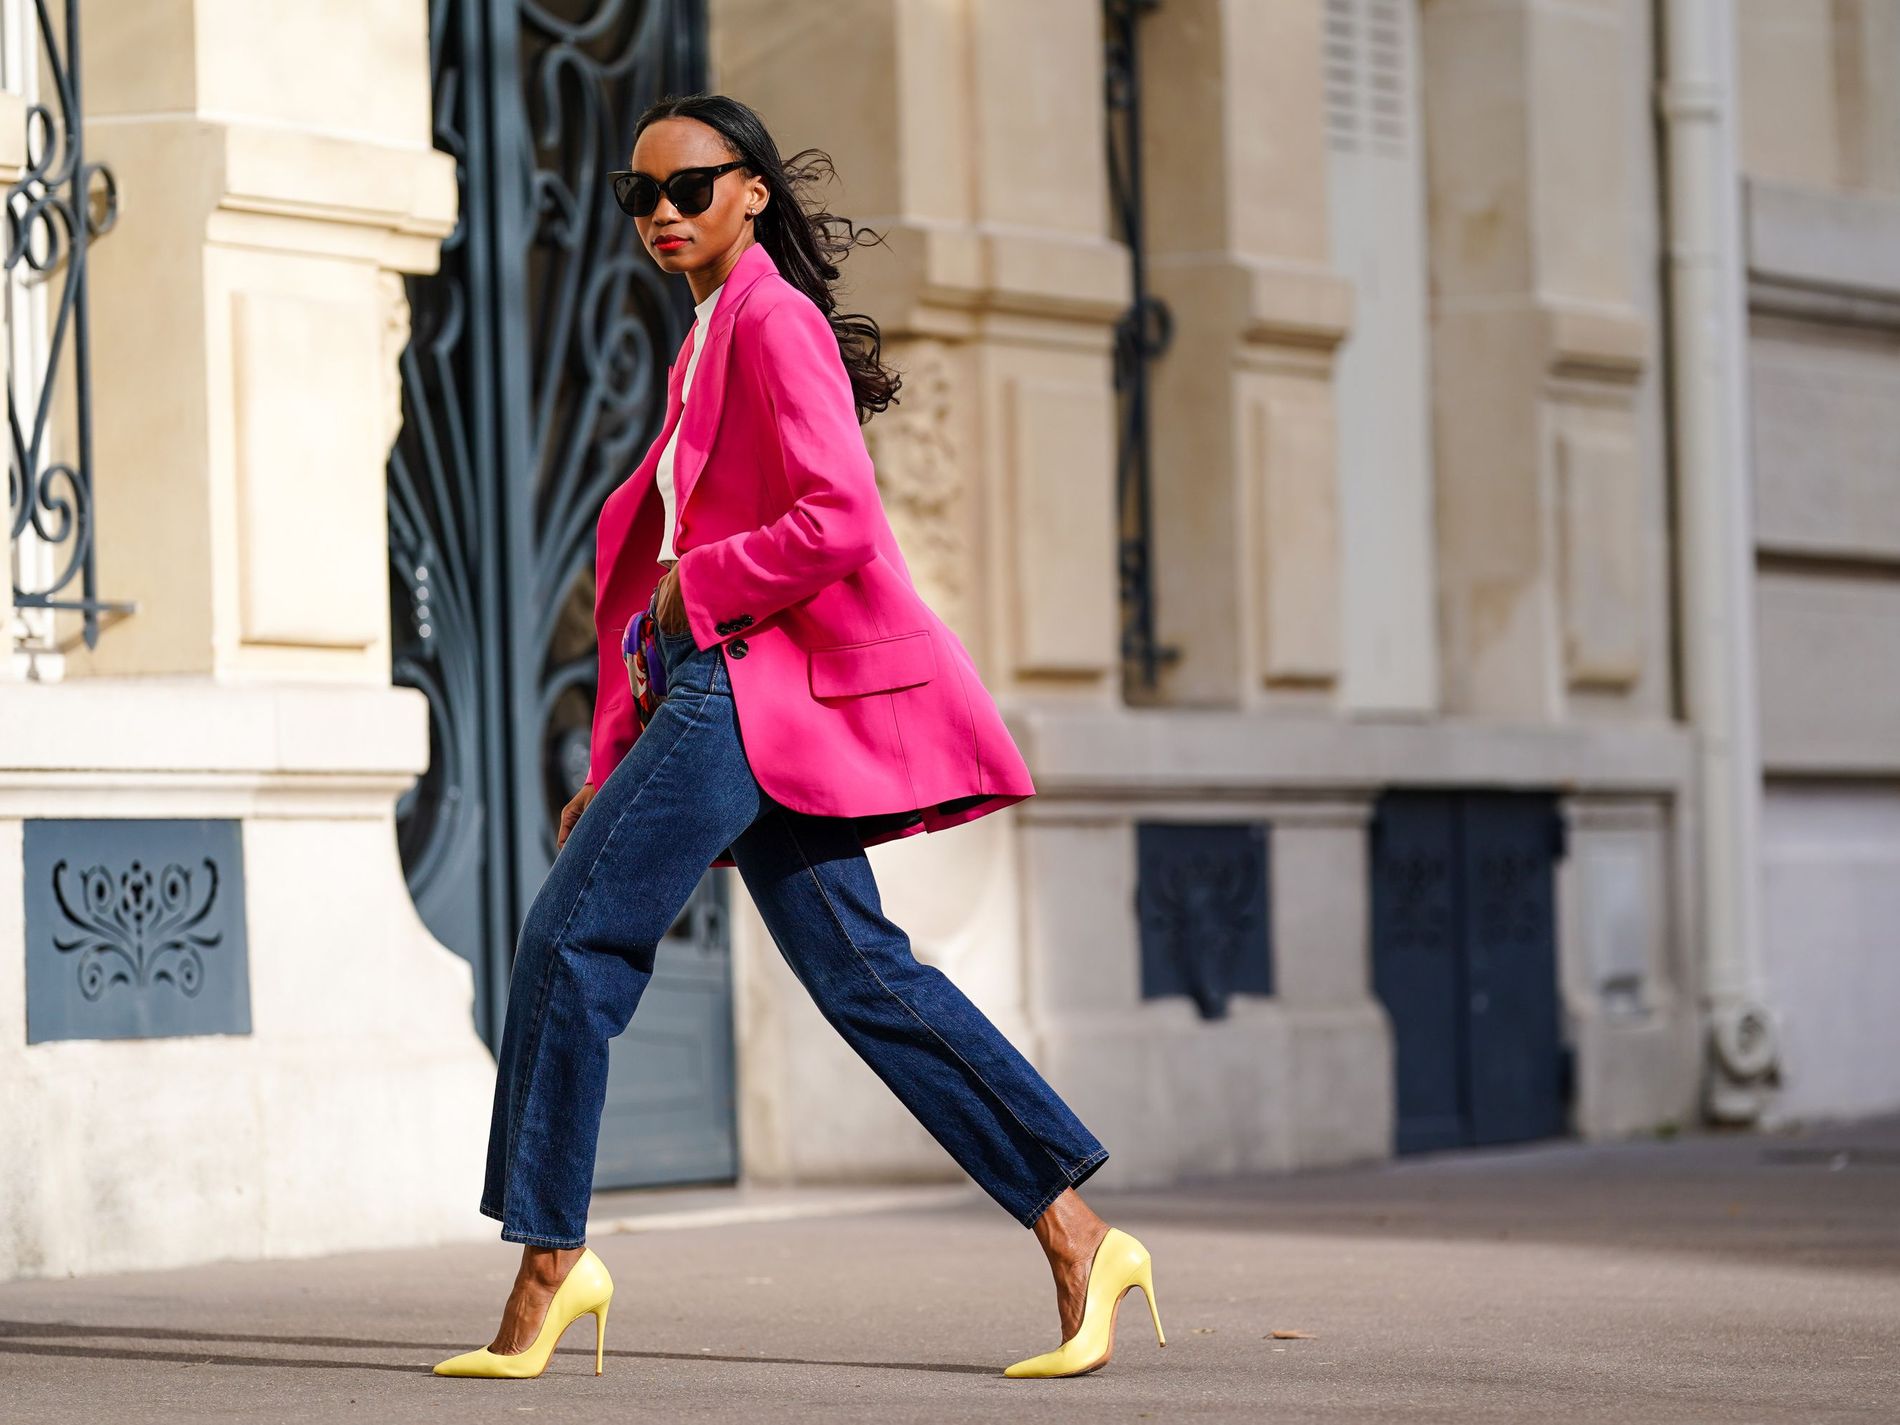 Woman wearing bright pink suit jacket, a trend to shop for spring/summer 2022